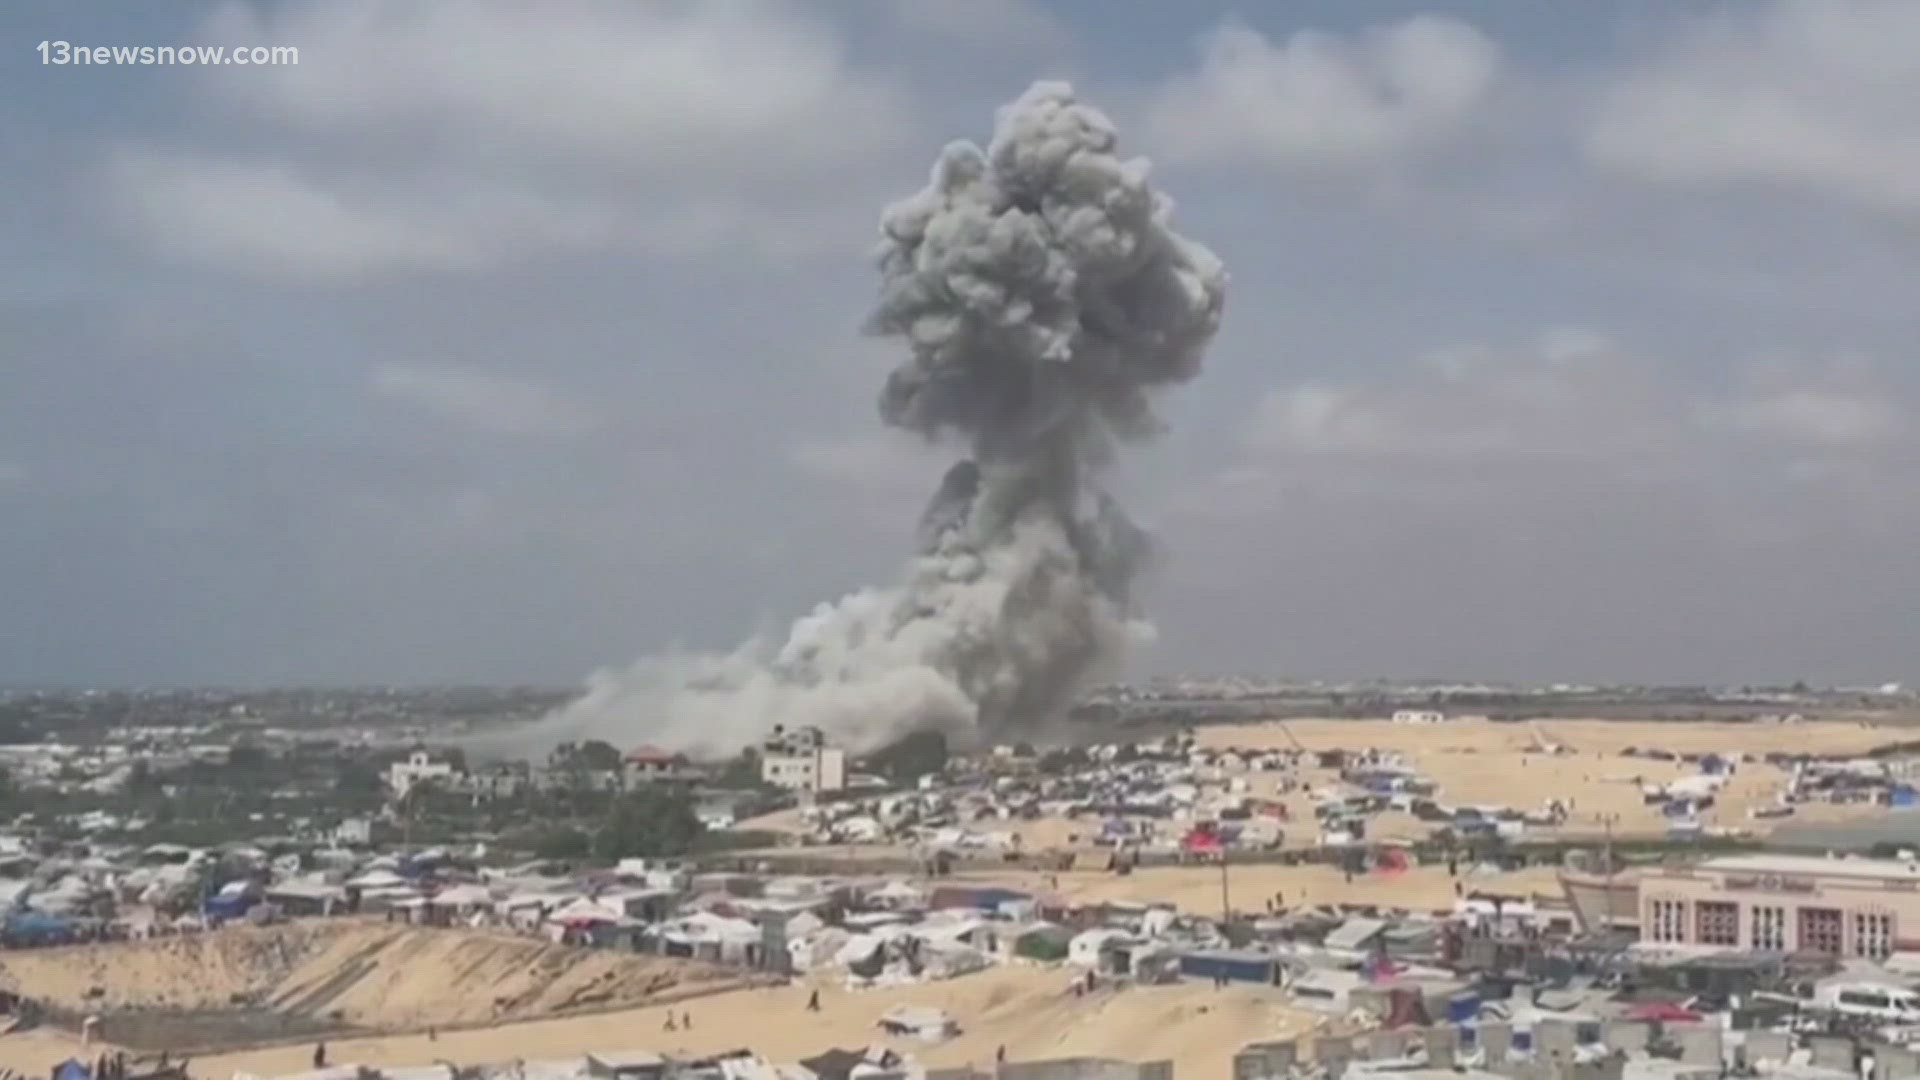 Israeli officials are warning people to evacuate the city of Rafah, which could signal a ground offensive is coming